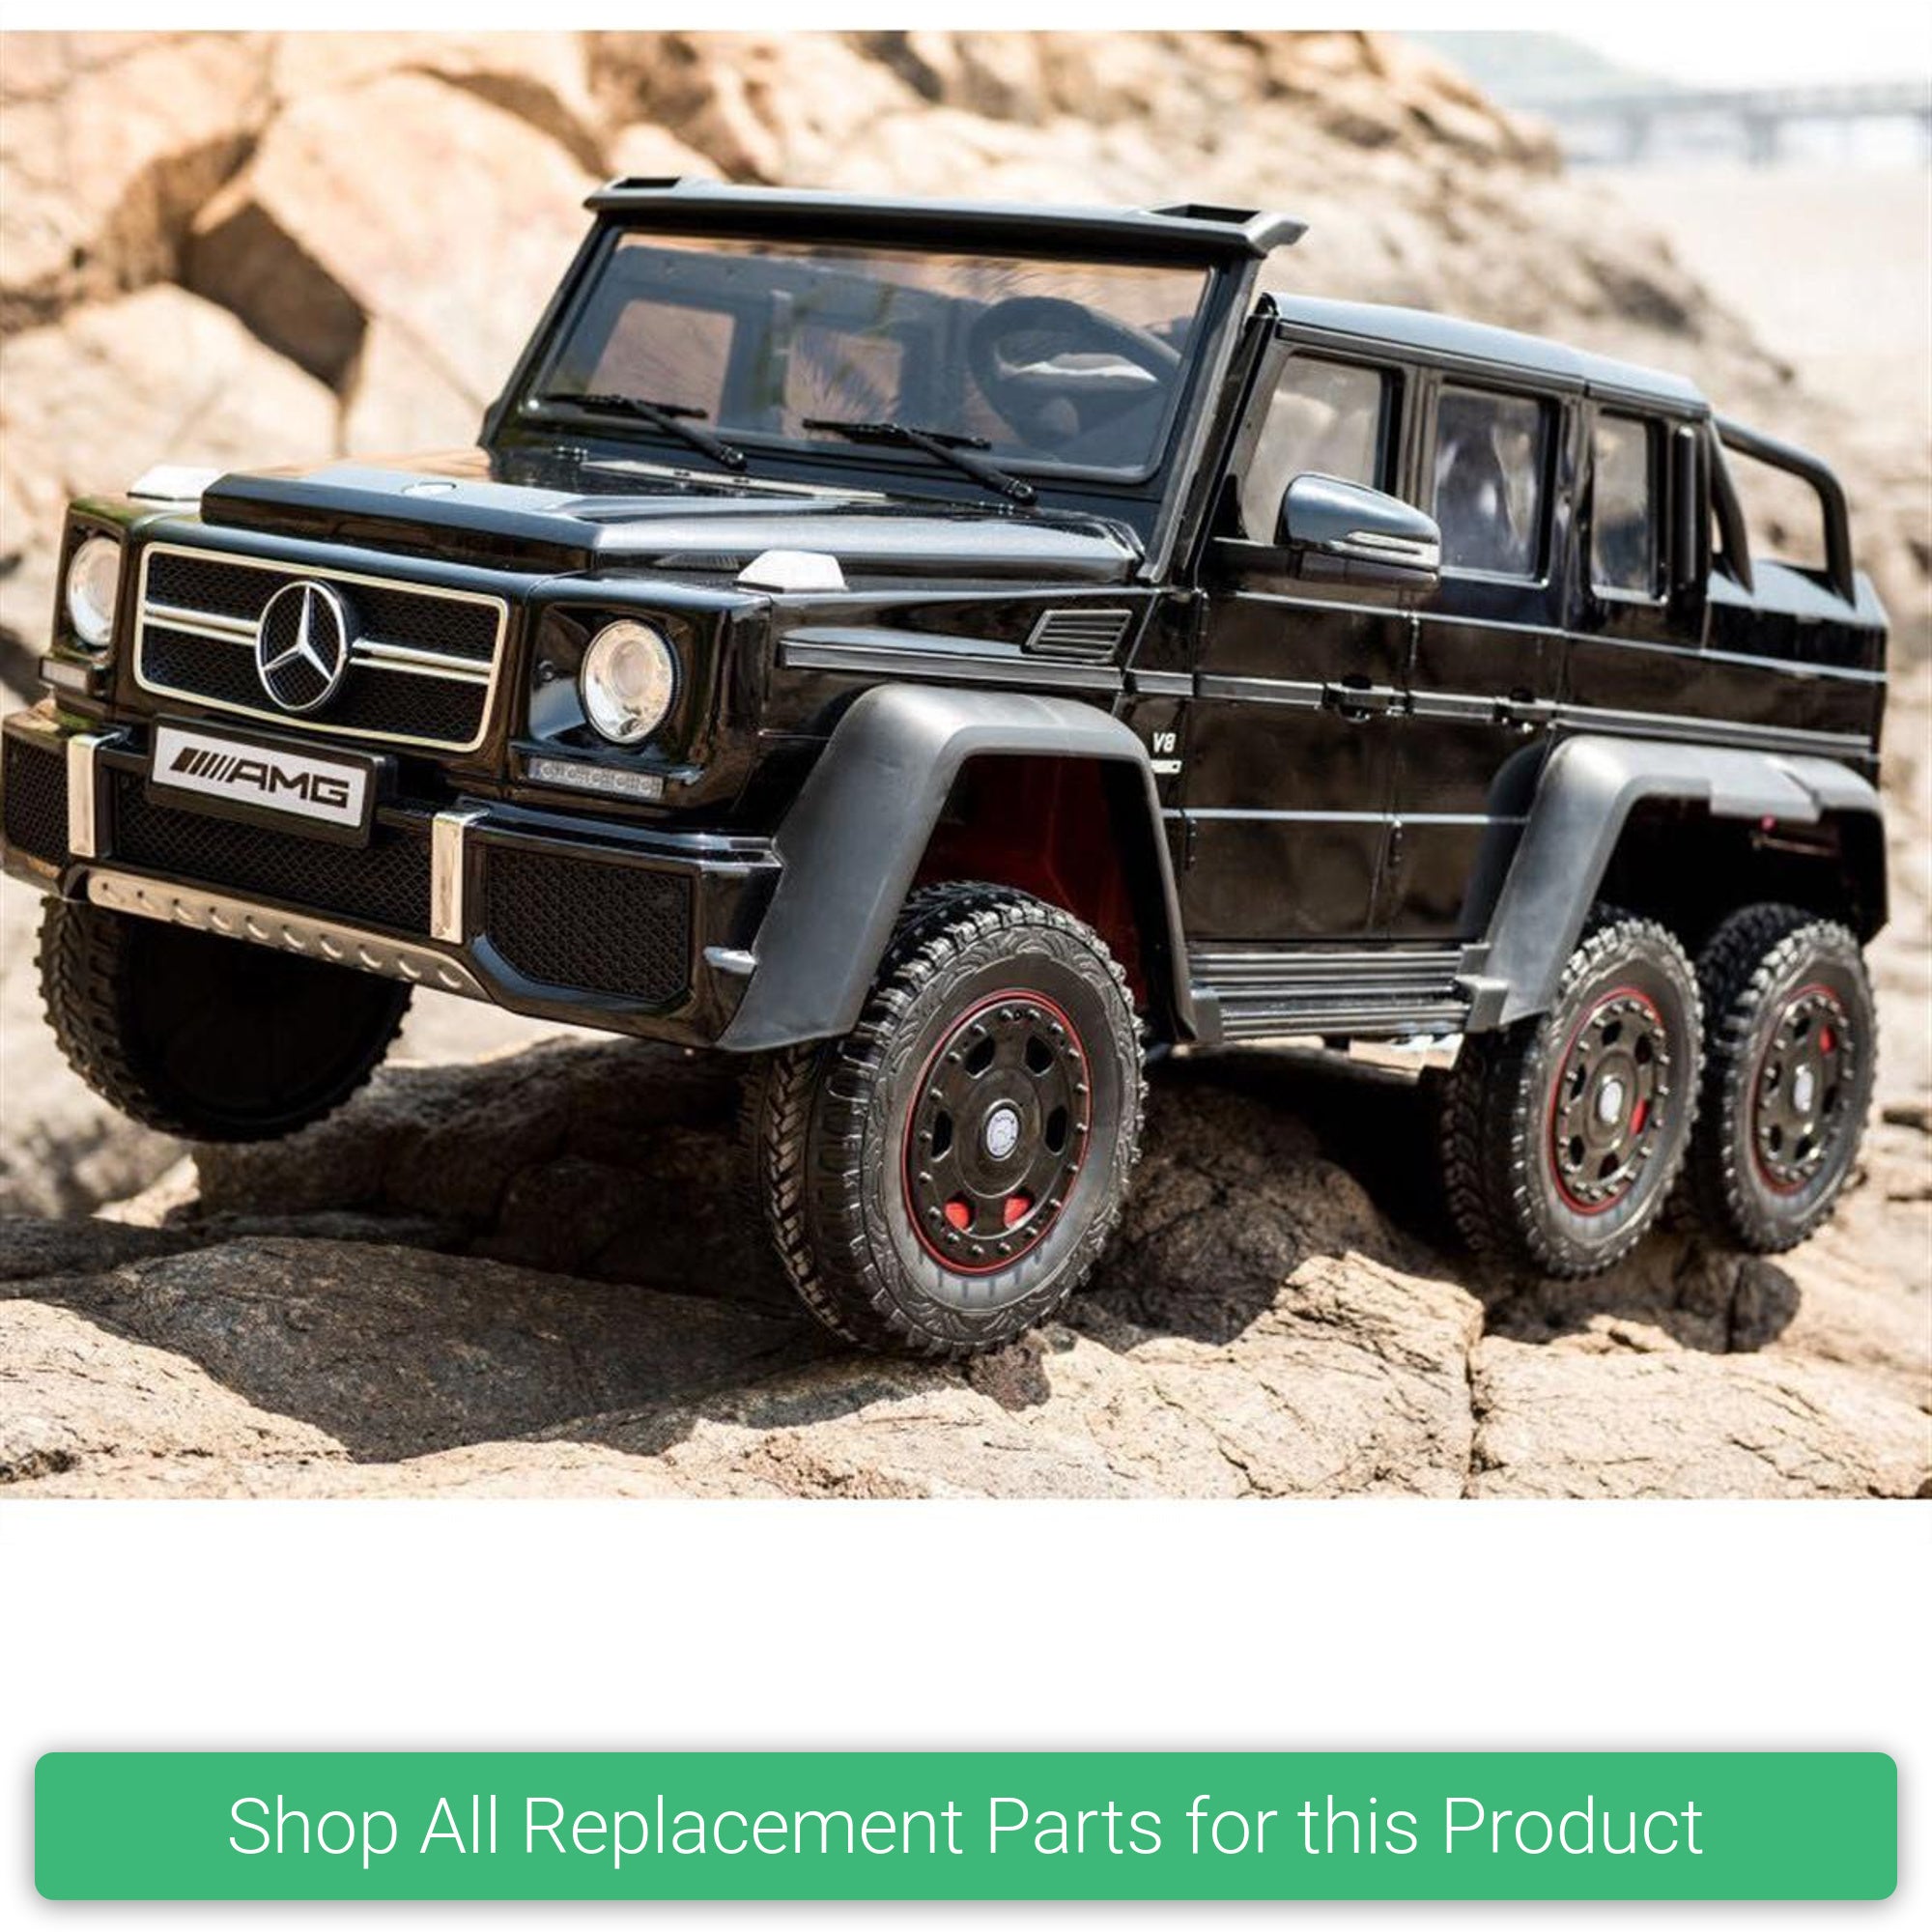 Replacement Parts and Spares for Kids Mercedes G63 6X6 - Mini - VAR-MIN-6X6 - DMD-318